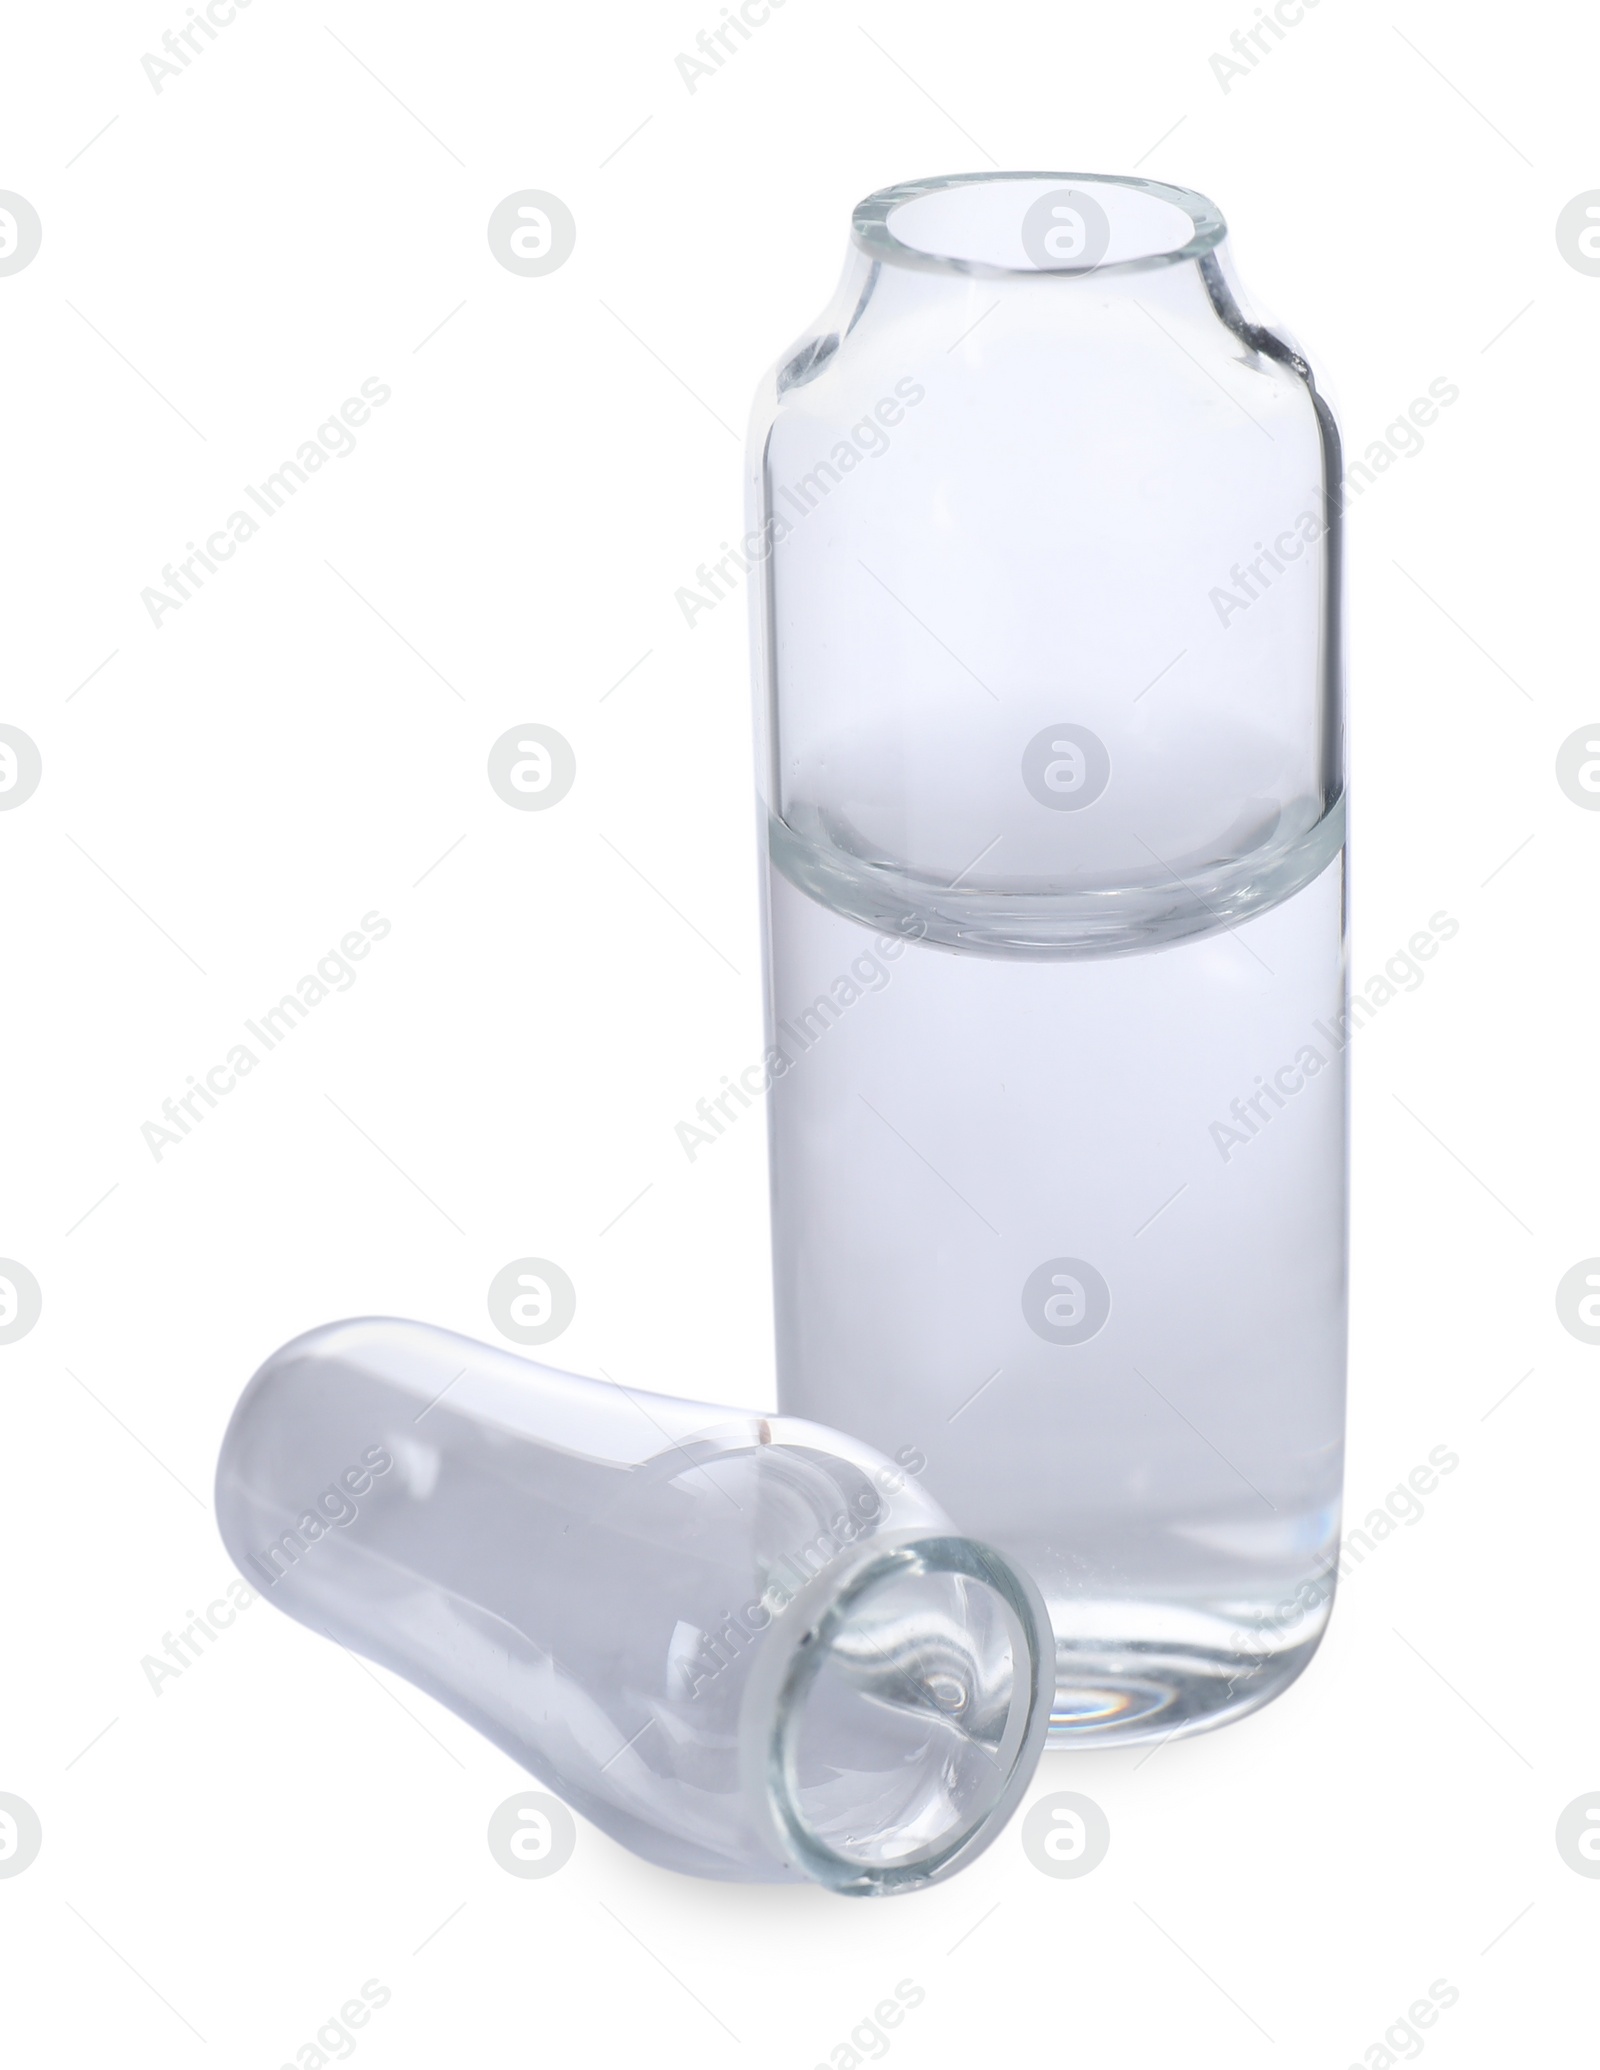 Photo of Open glass ampoule with medication isolated on white